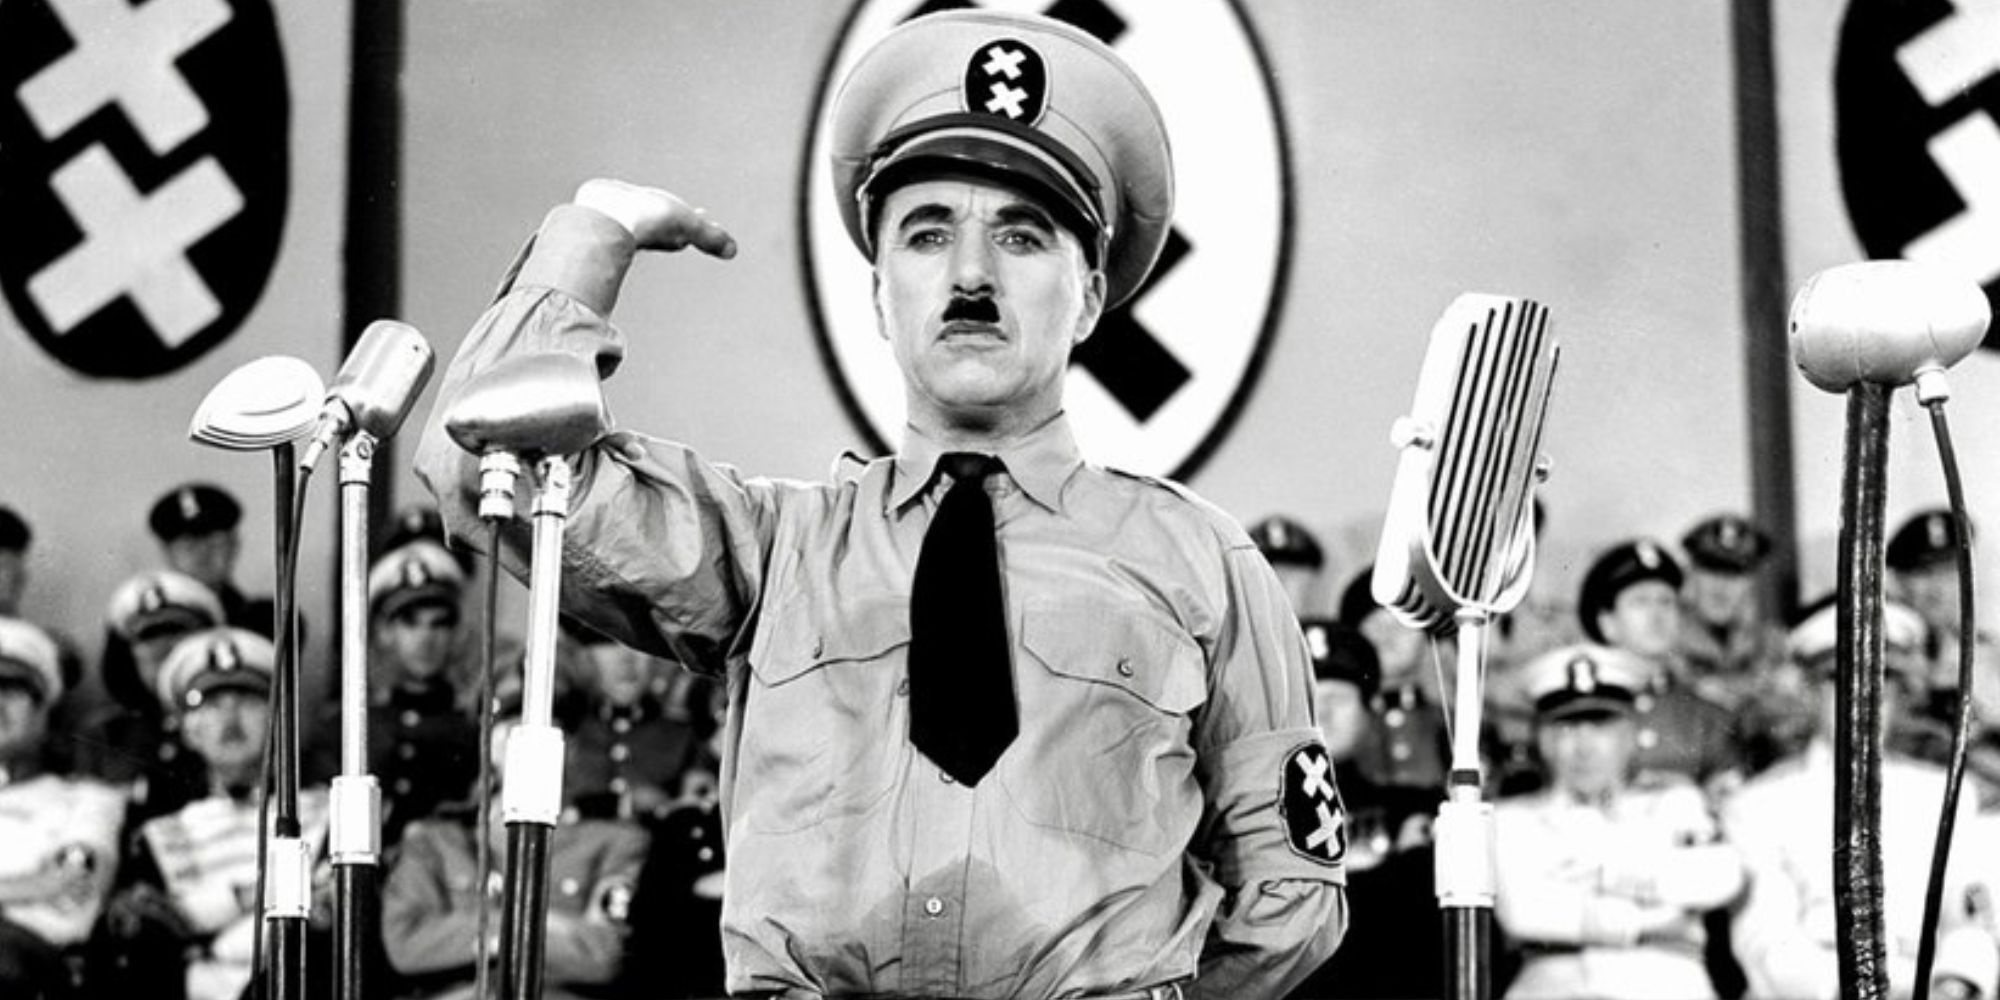 Charlie Chaplin dressed as Adolf Hitler raised his arms and stood on stage in The Great Dictator